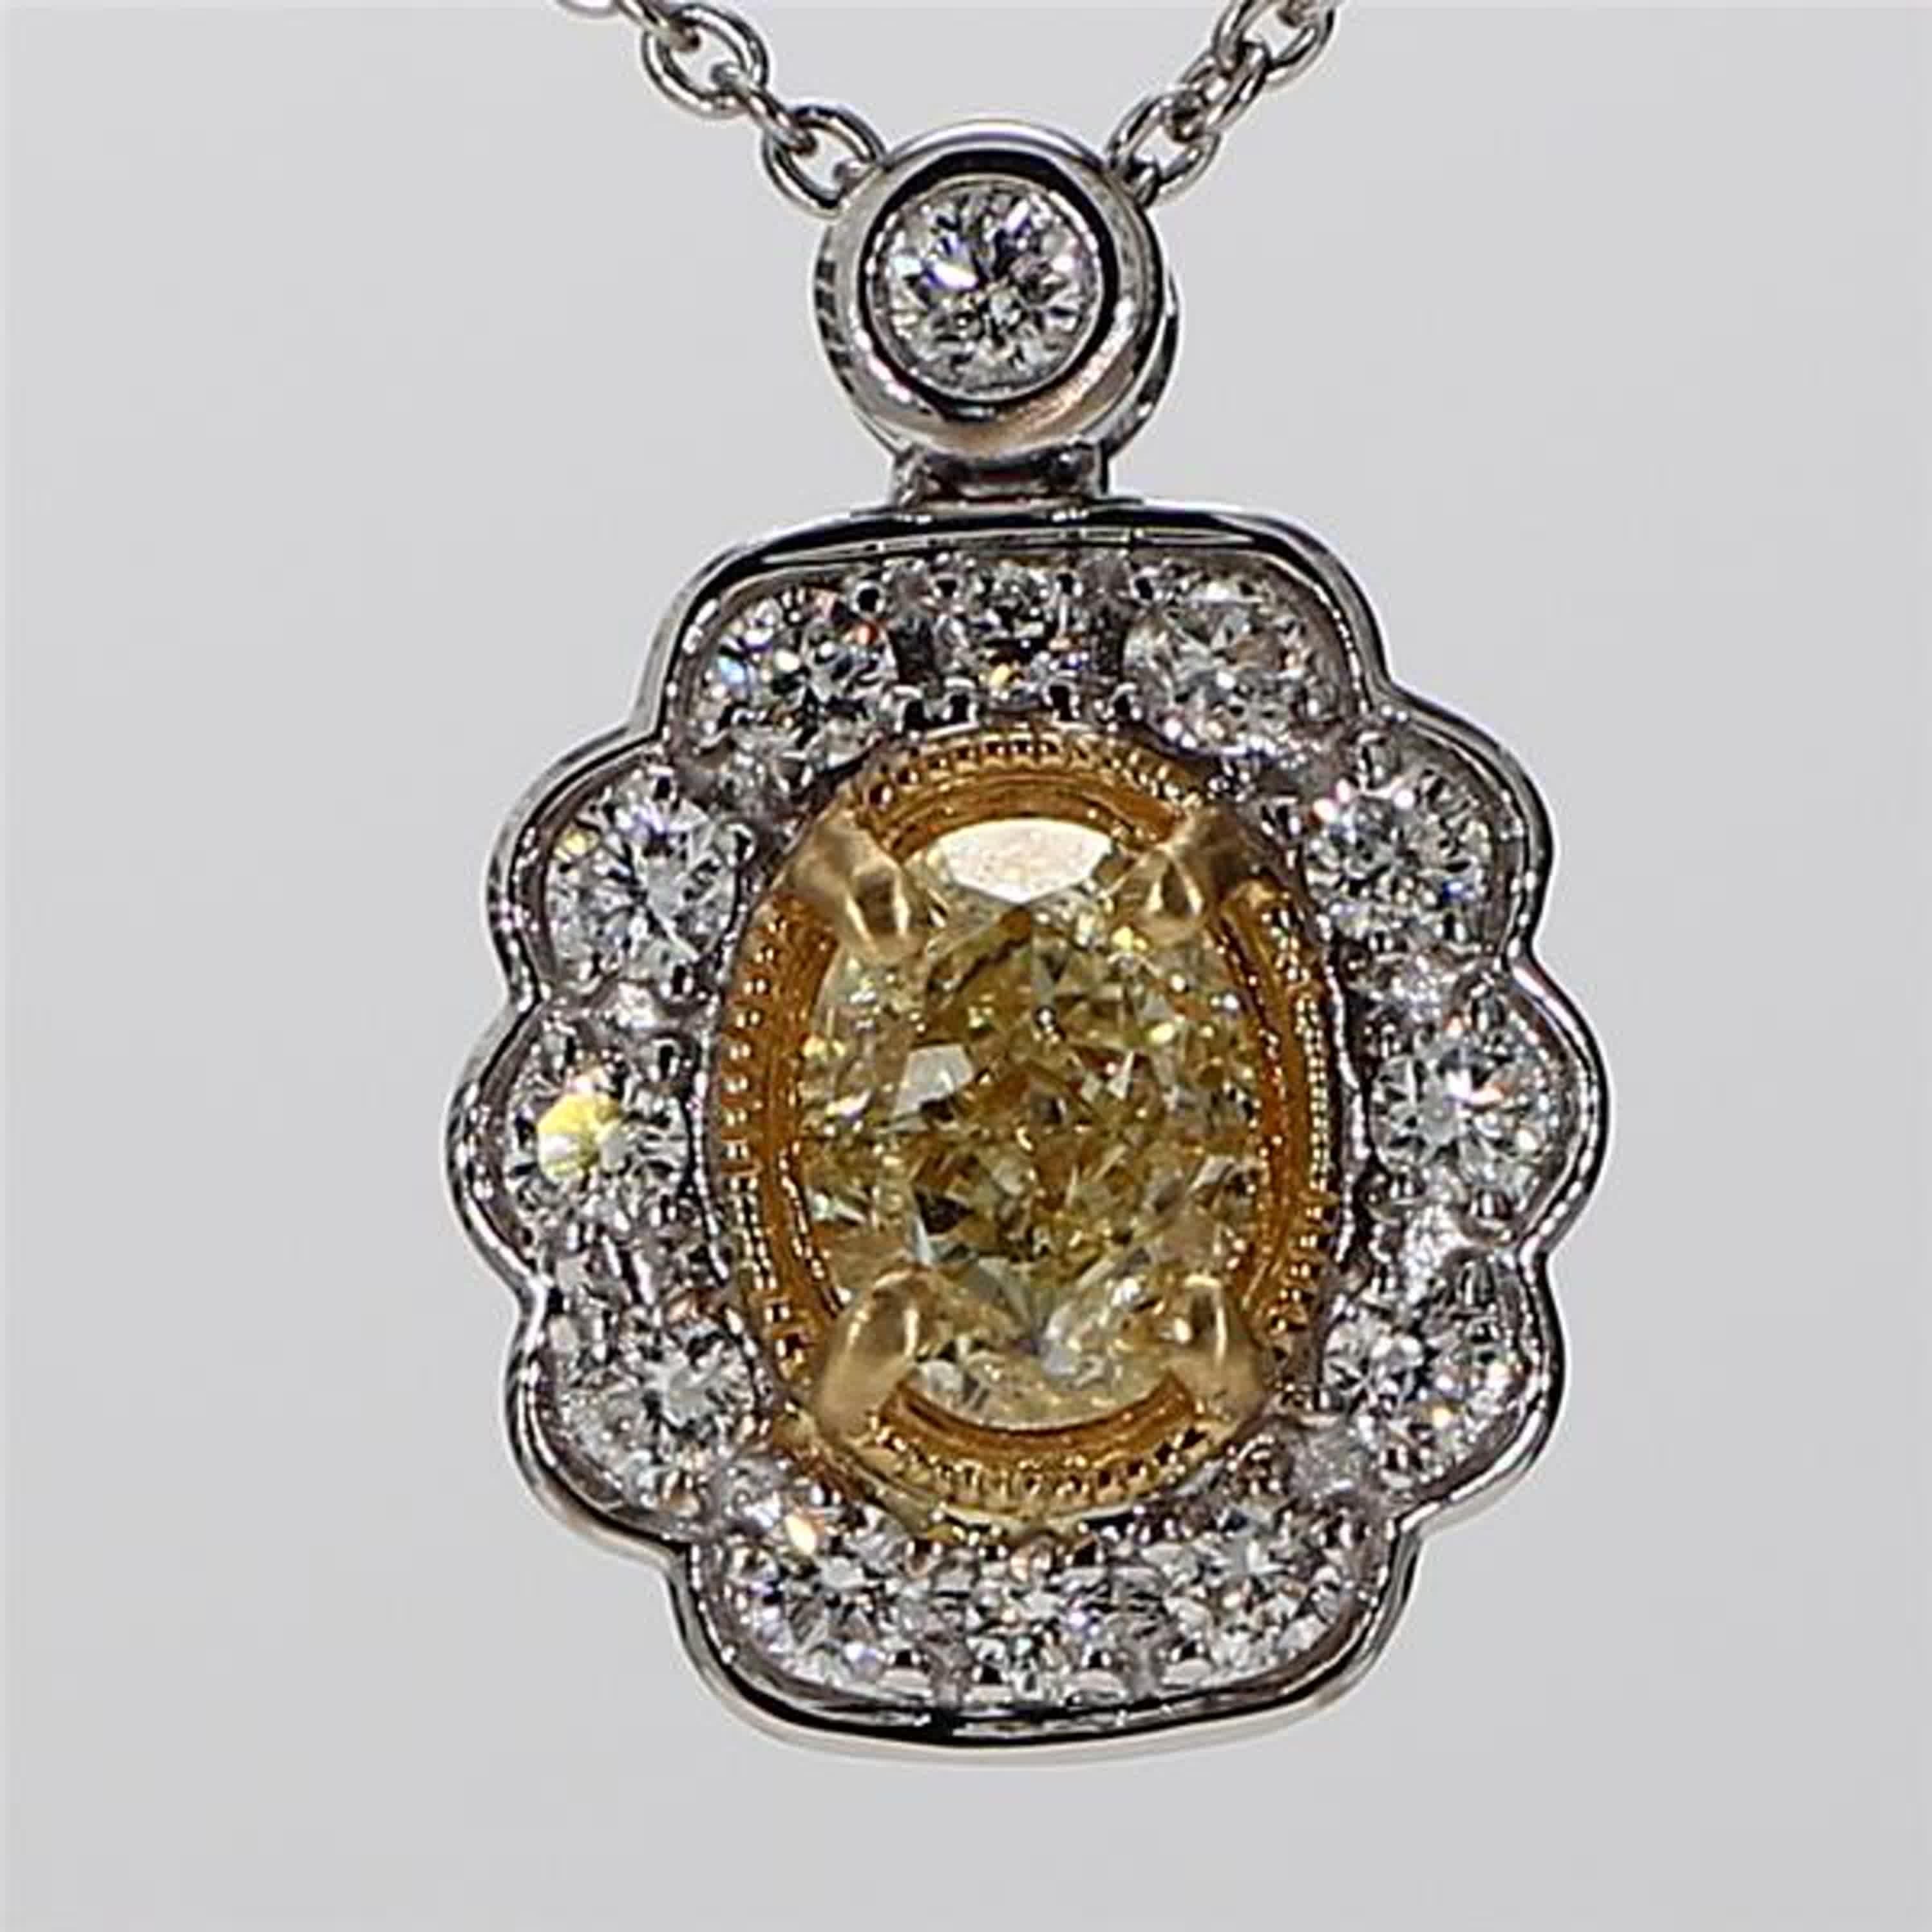 RareGemWorld's classic diamond pendant. Mounted in a beautiful 18K Yellow and White Gold setting with a natural cushion cut yellow diamond. The yellow diamond is surrounded by natural round white diamond melee. This pendant is guaranteed to impress